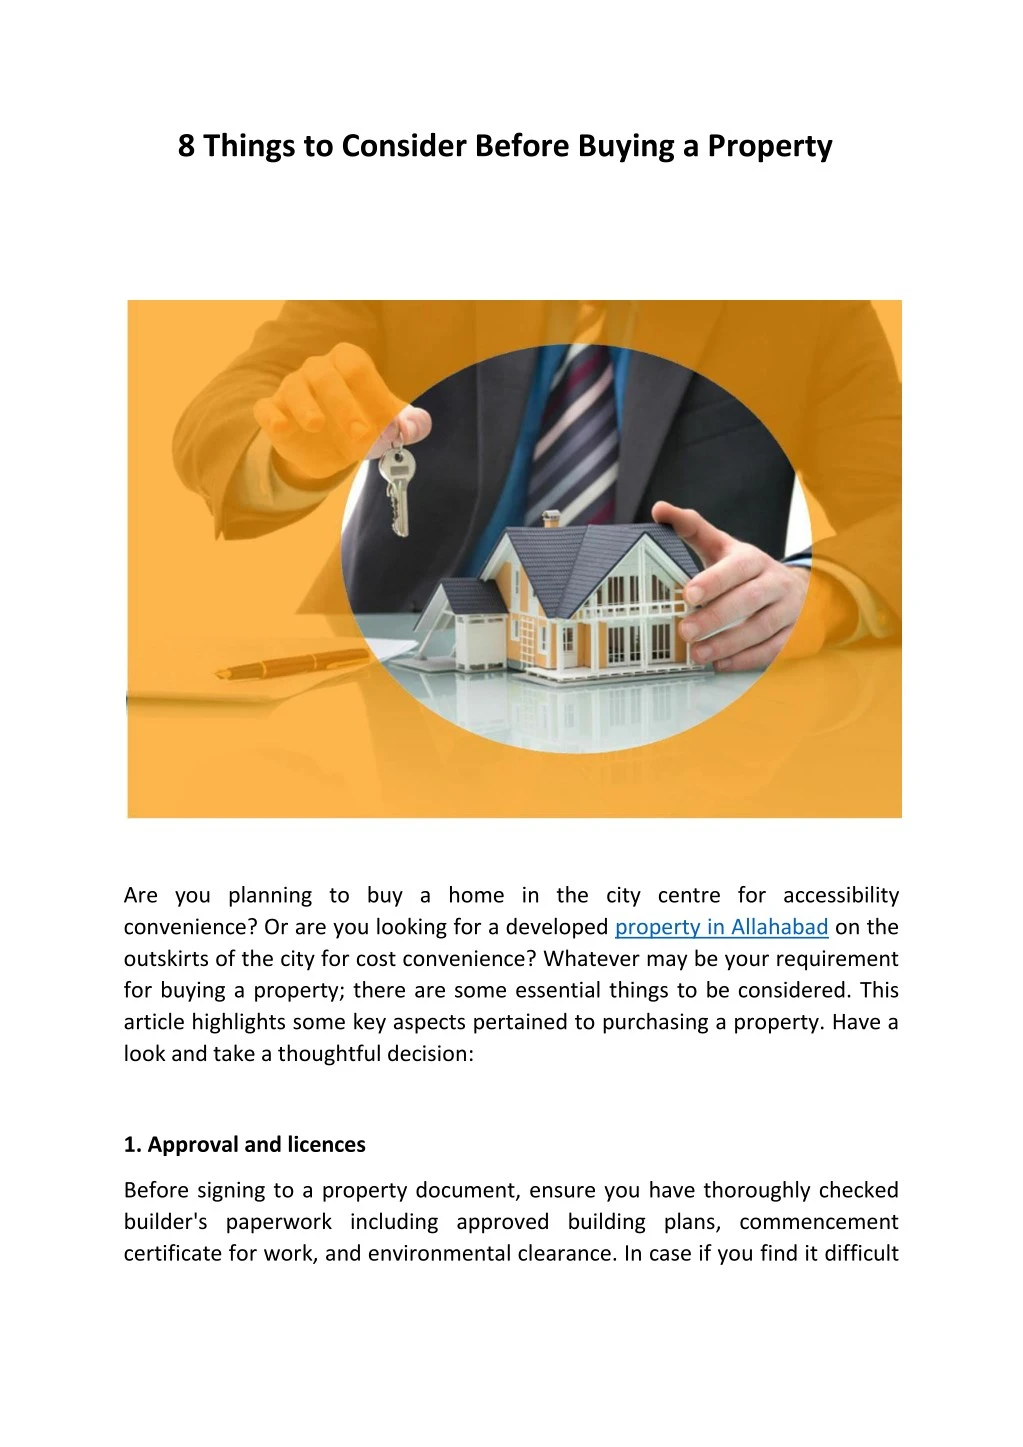 8 things to consider before buying a property